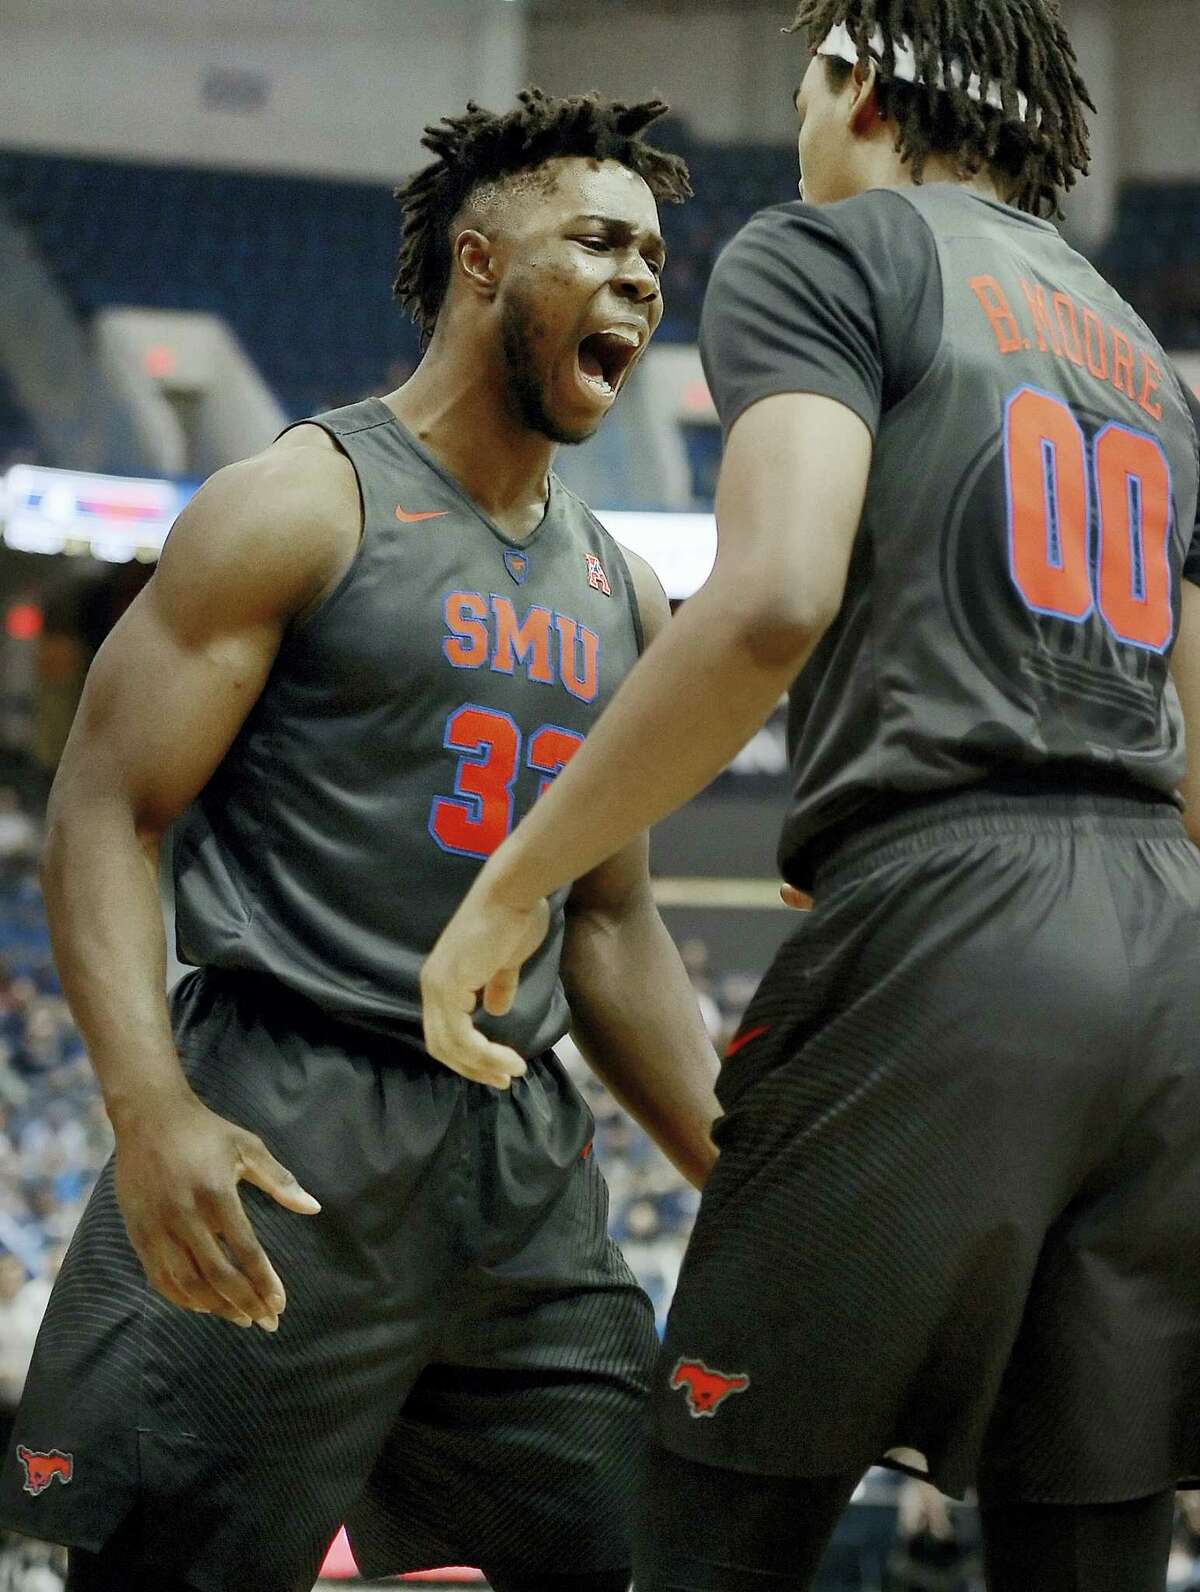 SMU’s Semi Ojeleye, left, is David Borges’ pick for AAC Player of the Year.